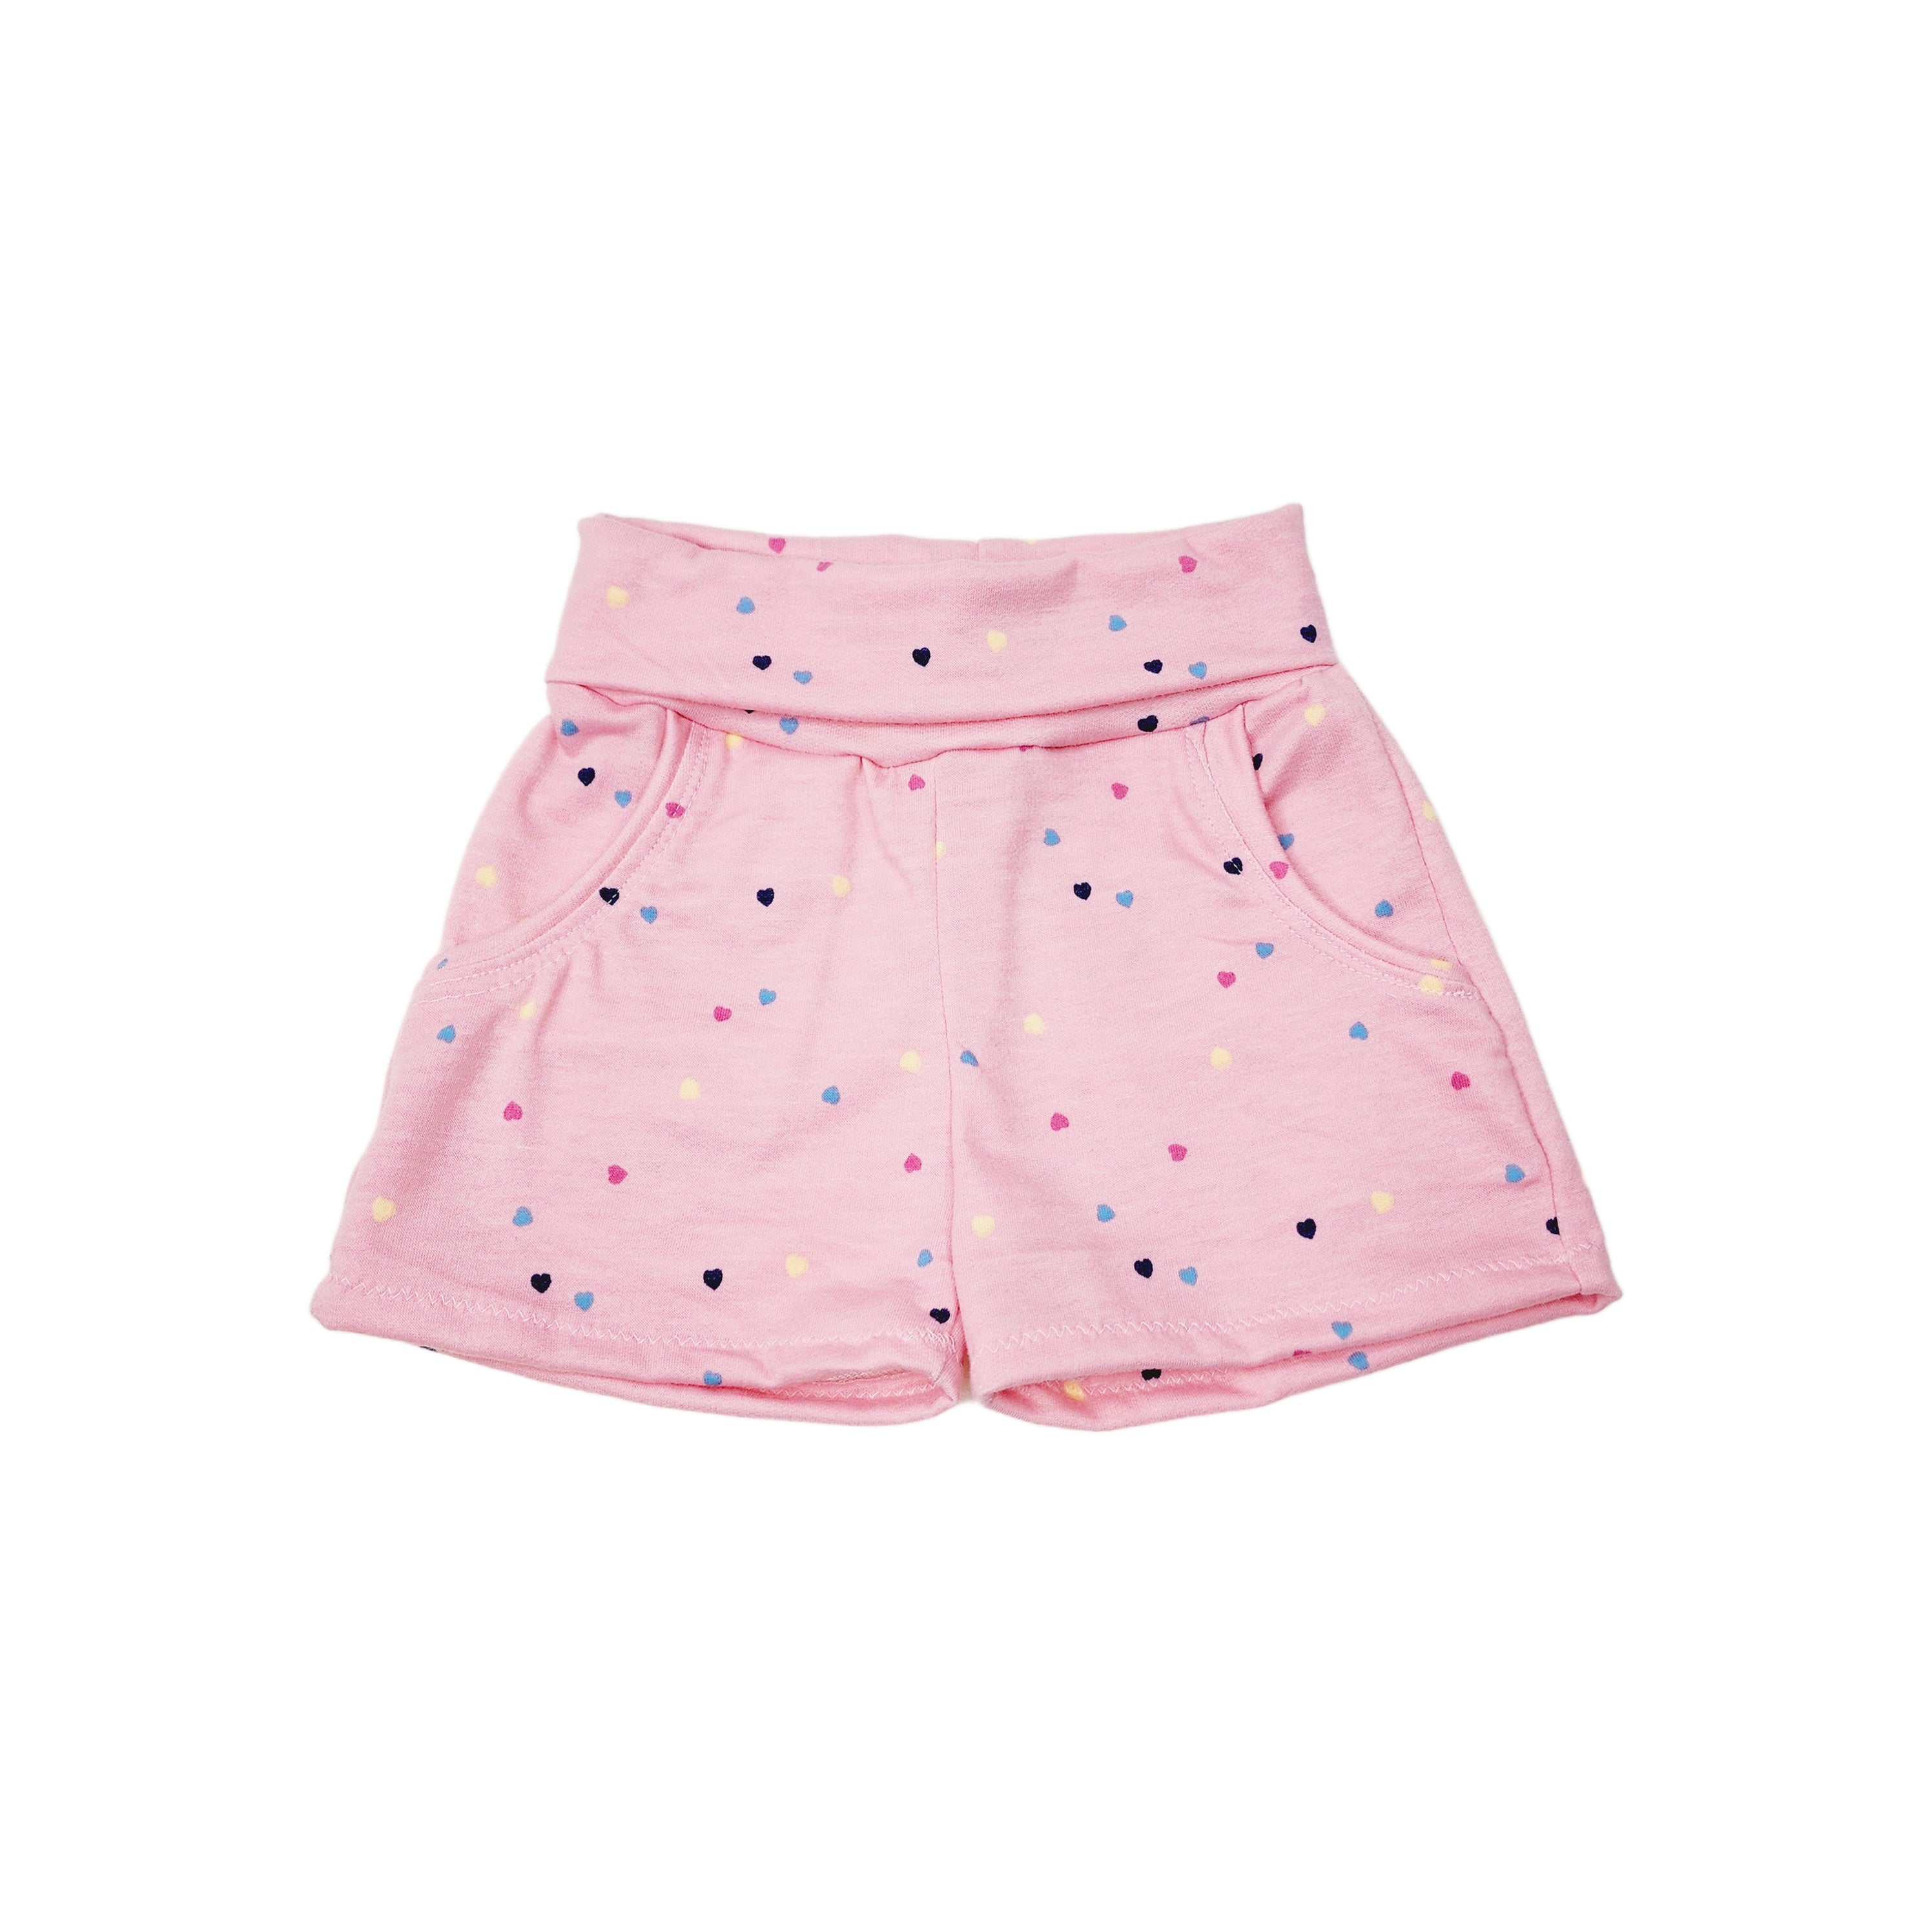 Pink Confetti Heart Print Knit Terry Shorts for Girls